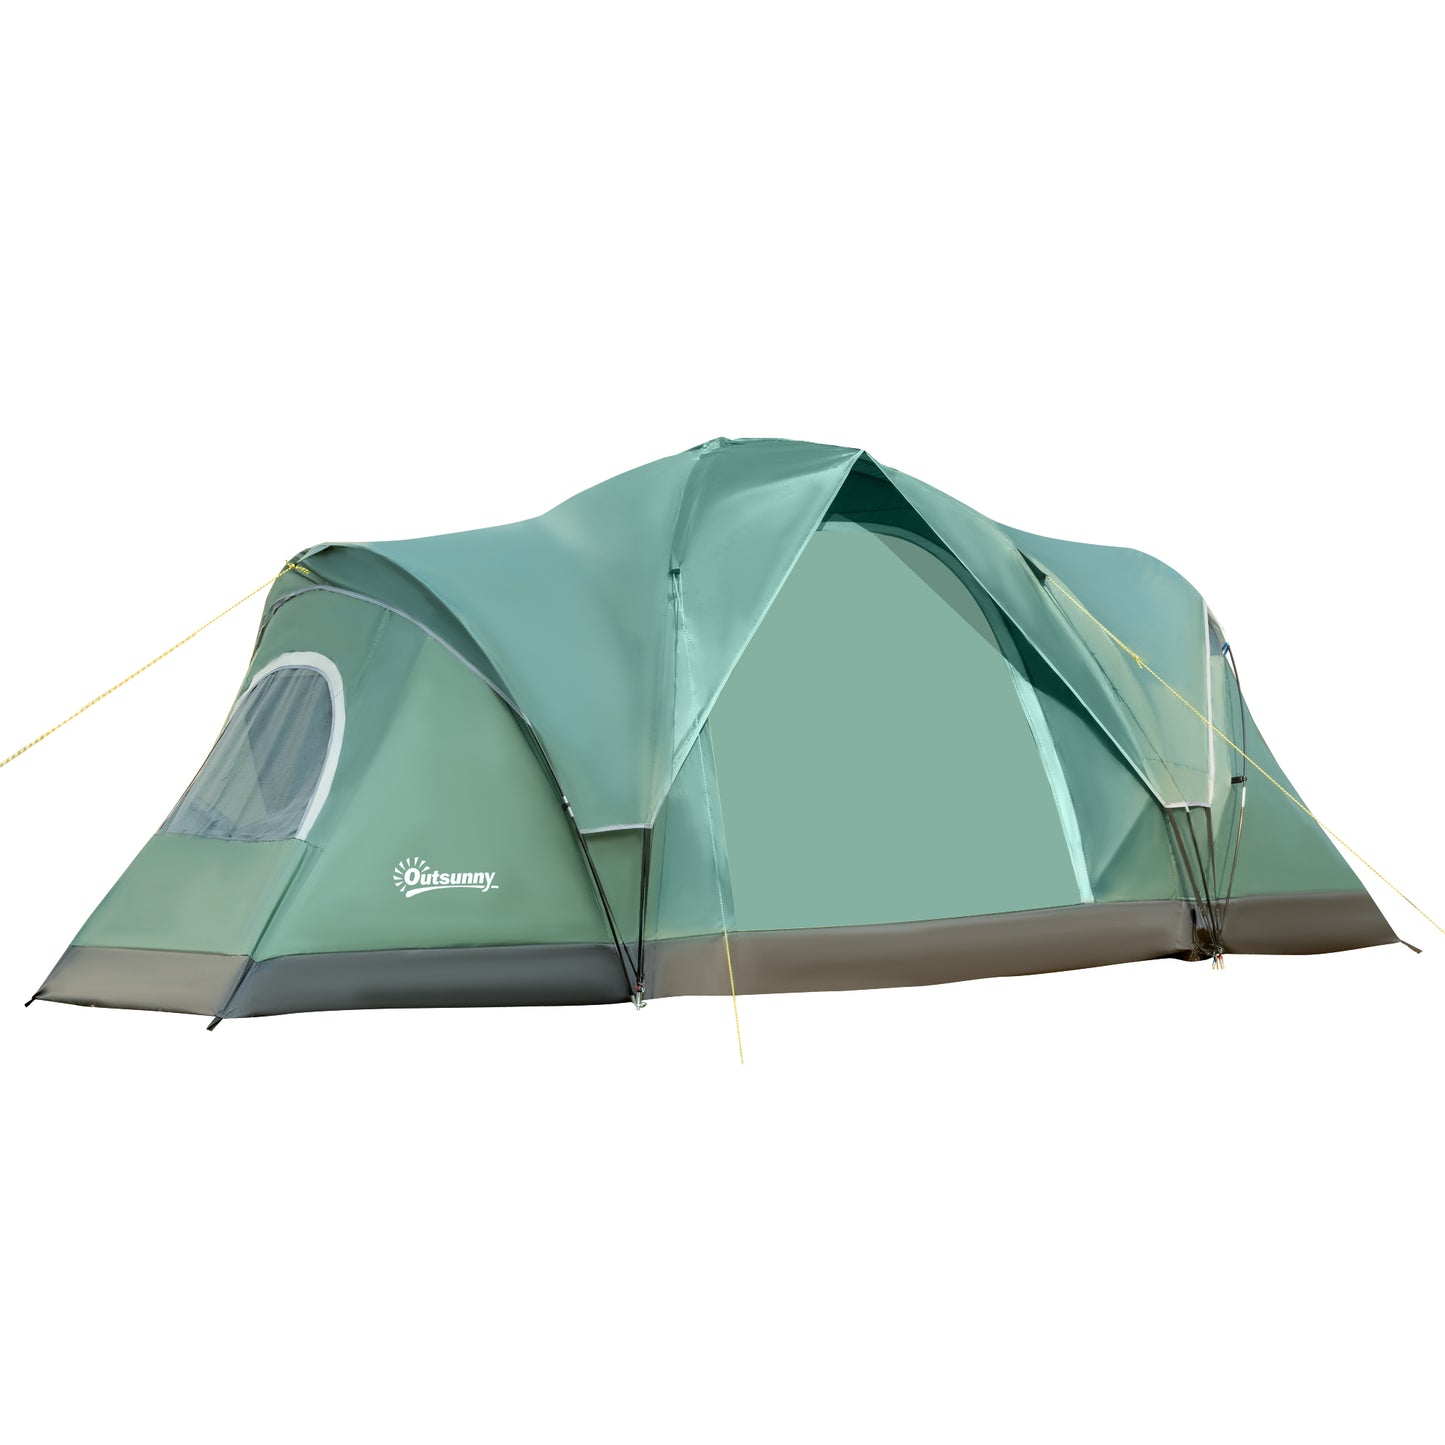 5-6 Person Family Tent, Outdoor Camping Tent with Lighting Hook, Carrying Bag for Camping, Hiking and Travelling, Green at Gallery Canada